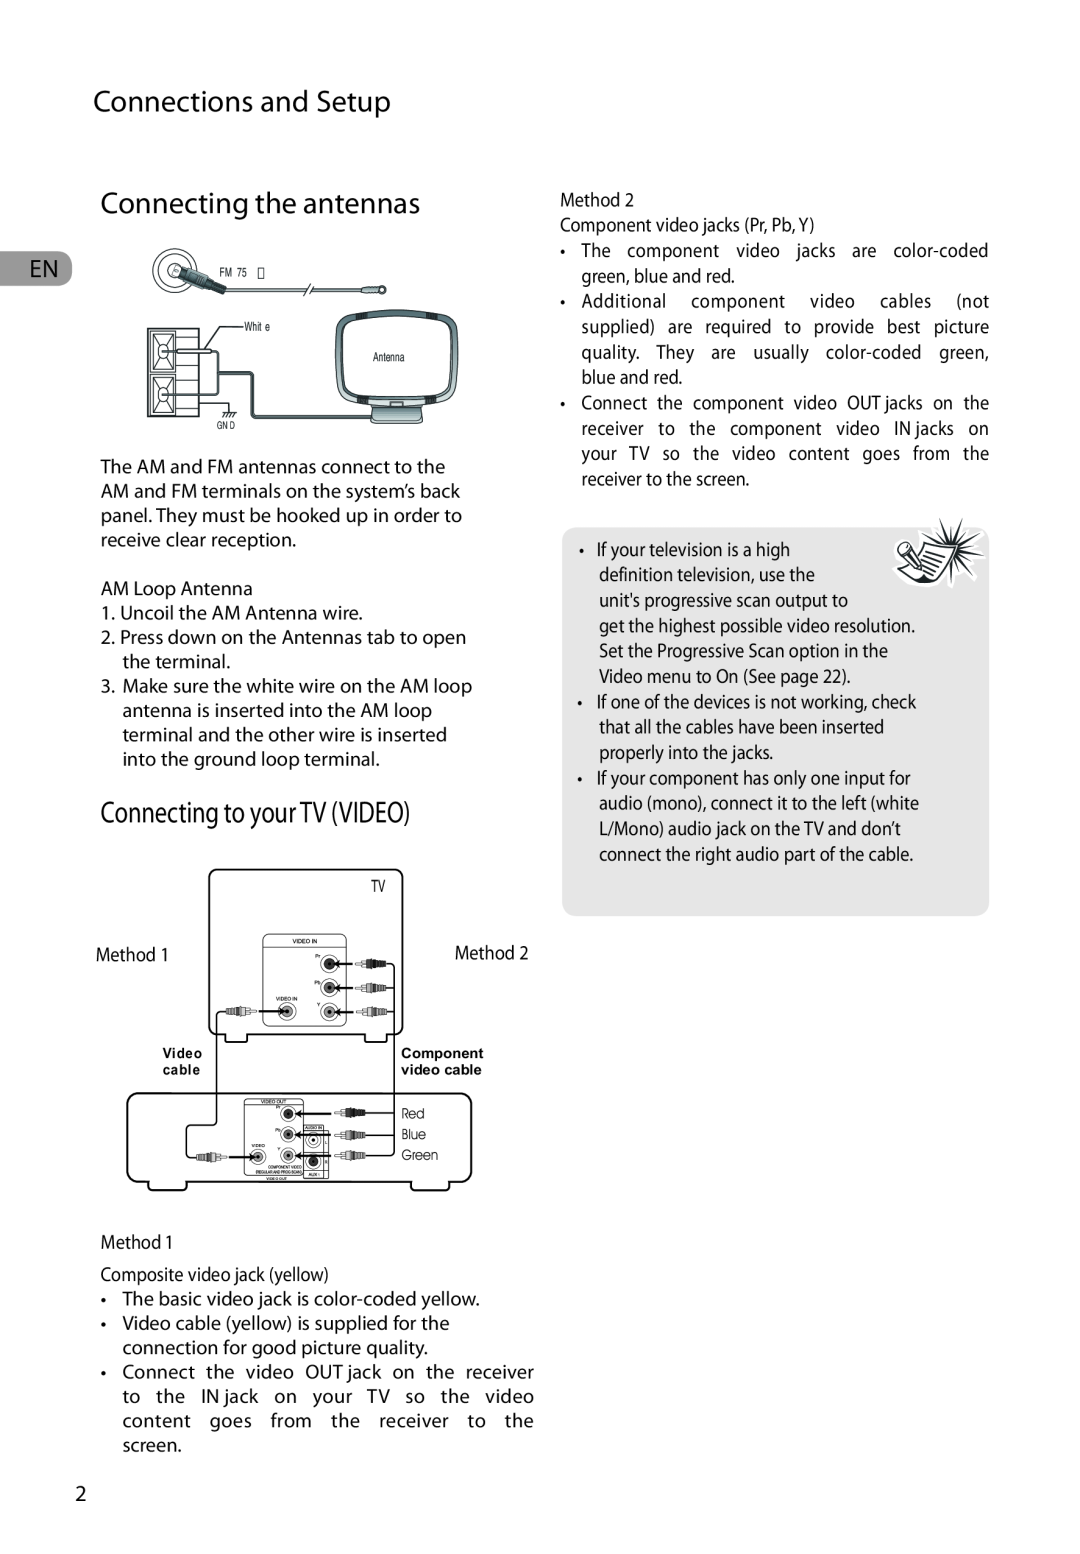 RCA RTD317 user manual Connections and Setup Connecting the antennas, Connecting to your TV VIDEO, Method 